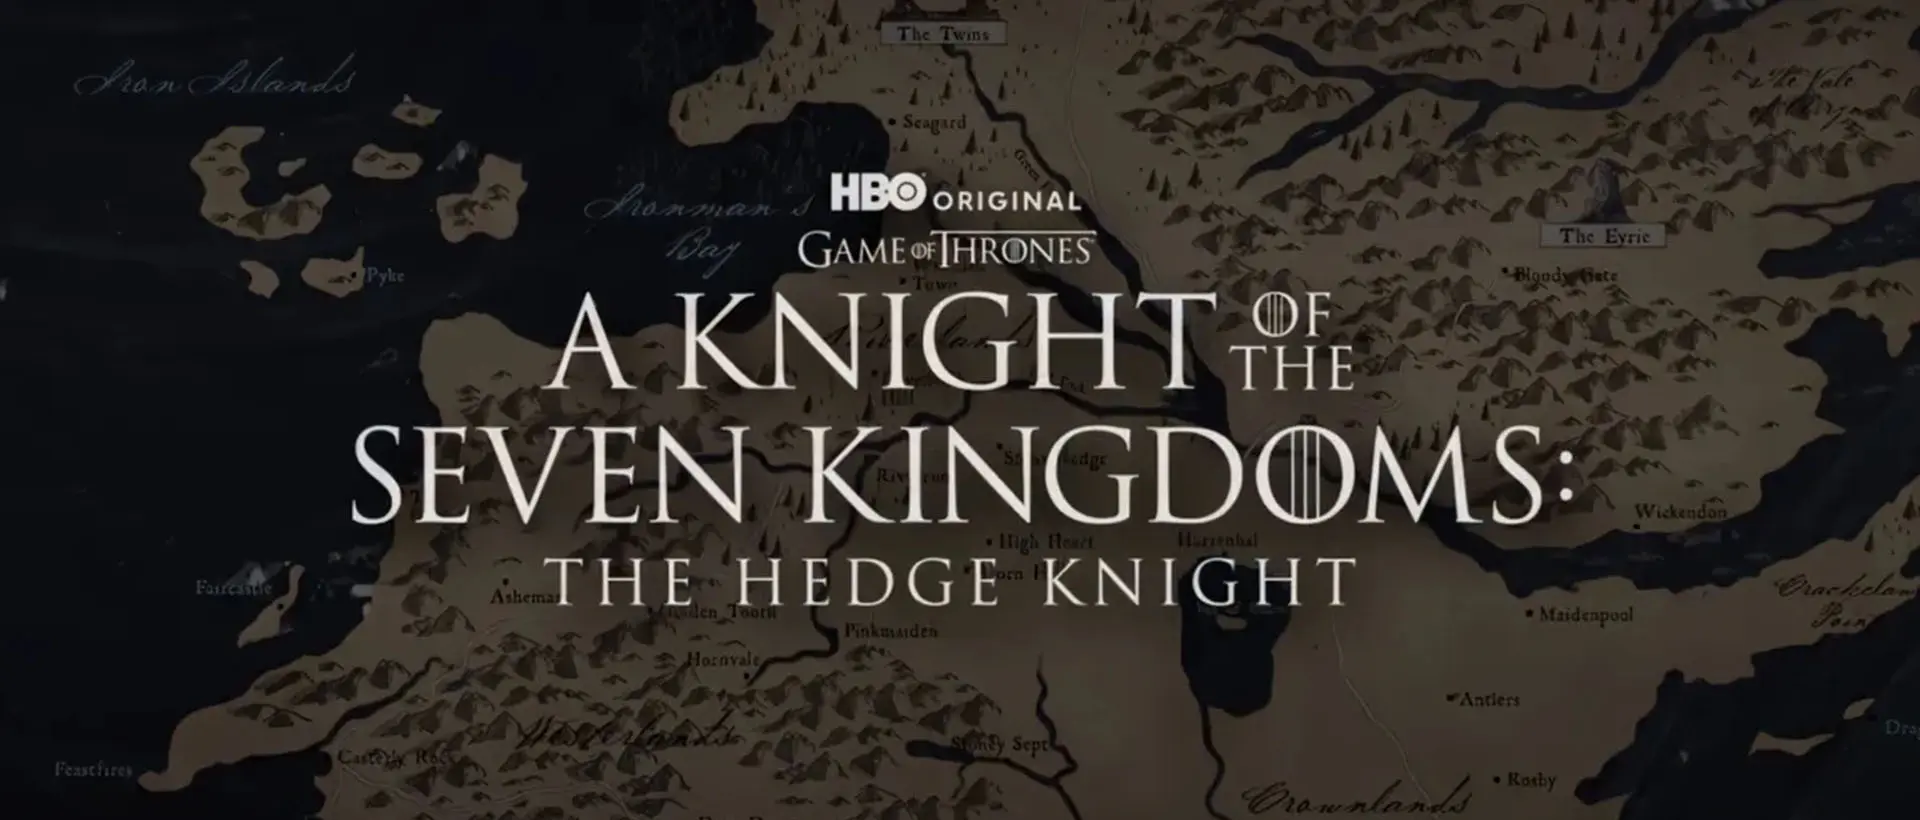 hbo hedge knight tv series banner